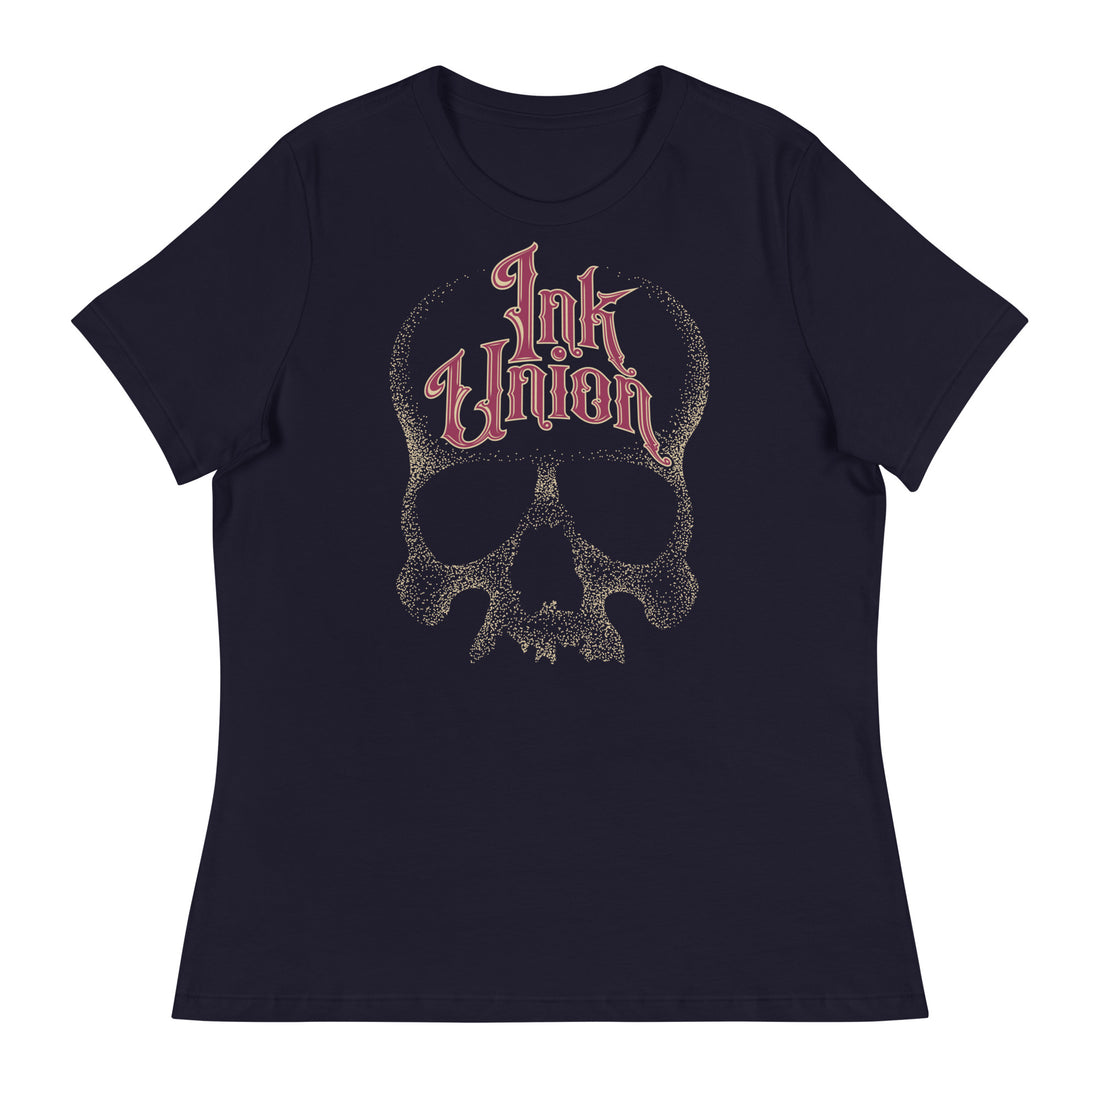 A navy blue t-shirt adorned with a gold dot work human skull  and the words Ink Union in fancy gold and red lettering across the forehead of the skull.